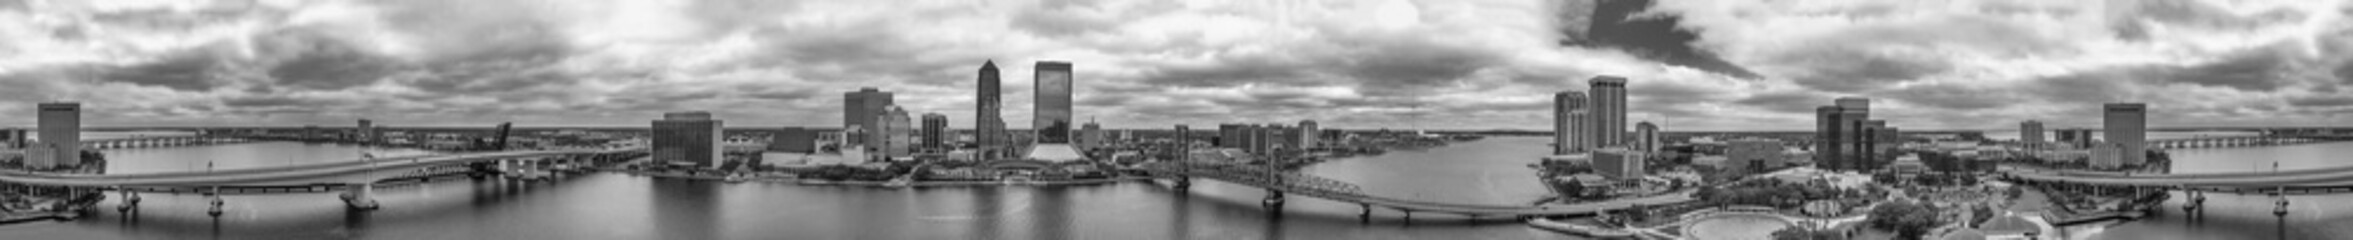 Panoramic aerial view of Jacksonville skyline from drone at sunset, Florida